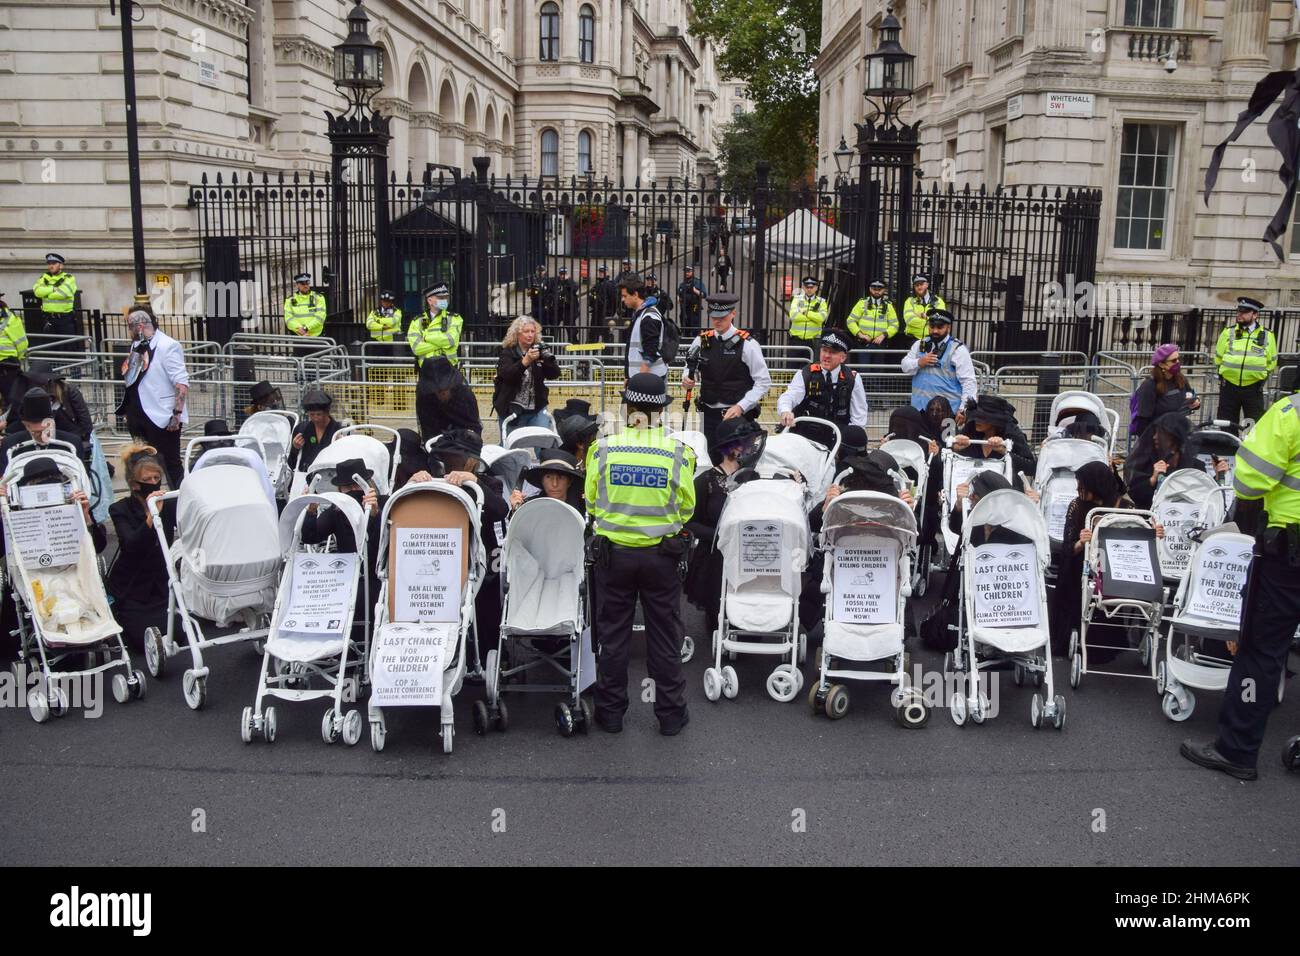 London, United Kingdom. 31st August 2021. Police observe protesters attached to prams outside Downing Street. Extinction Rebellion protesters dressed in black marched with prams in Westminster as part of their two-week Impossible Rebellion campaign. Stock Photo